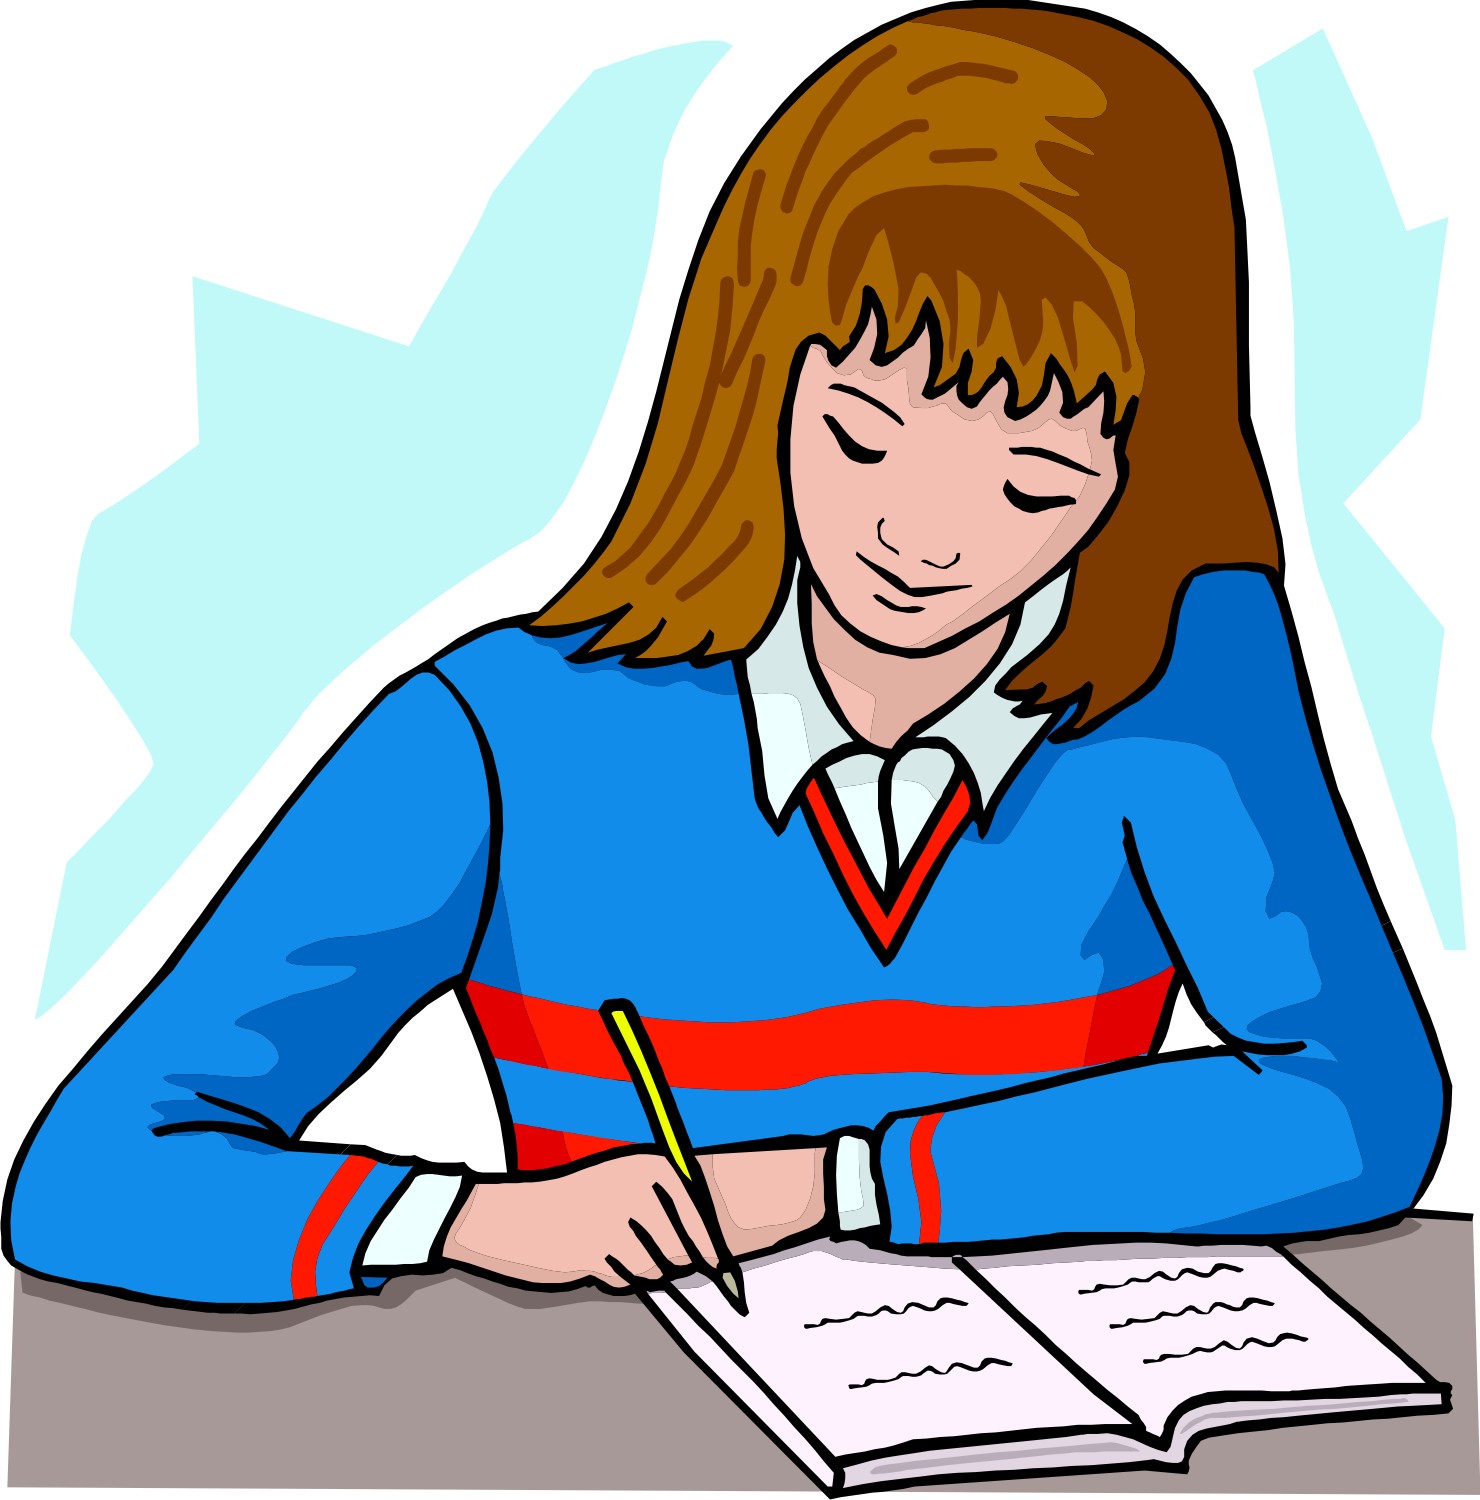 student writing clipart